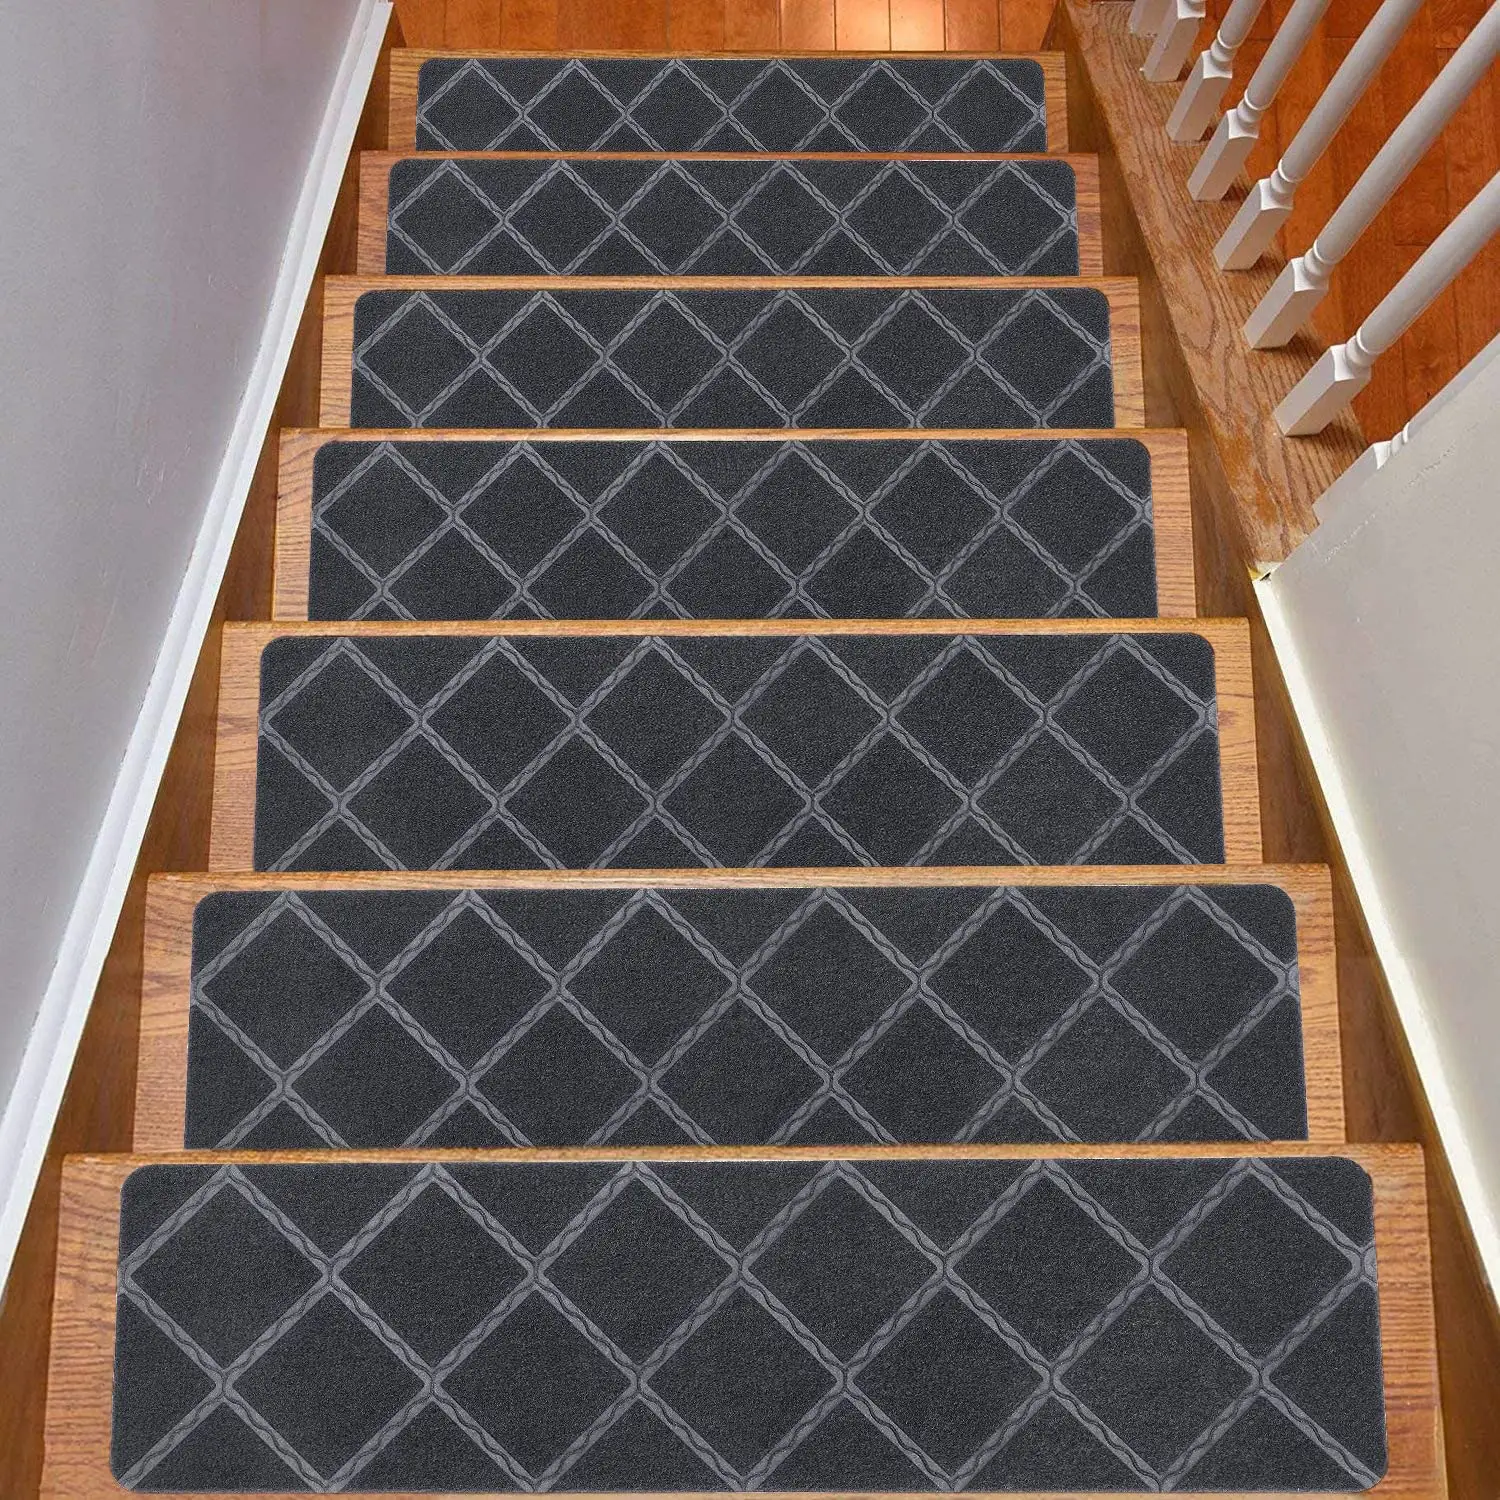 Stair Treads for Wooden Steps 15pcs Stair Treads Indoor Non-Slip Stair Carpet Tread Covers Rugs 8in x 30in Gray Black coffee